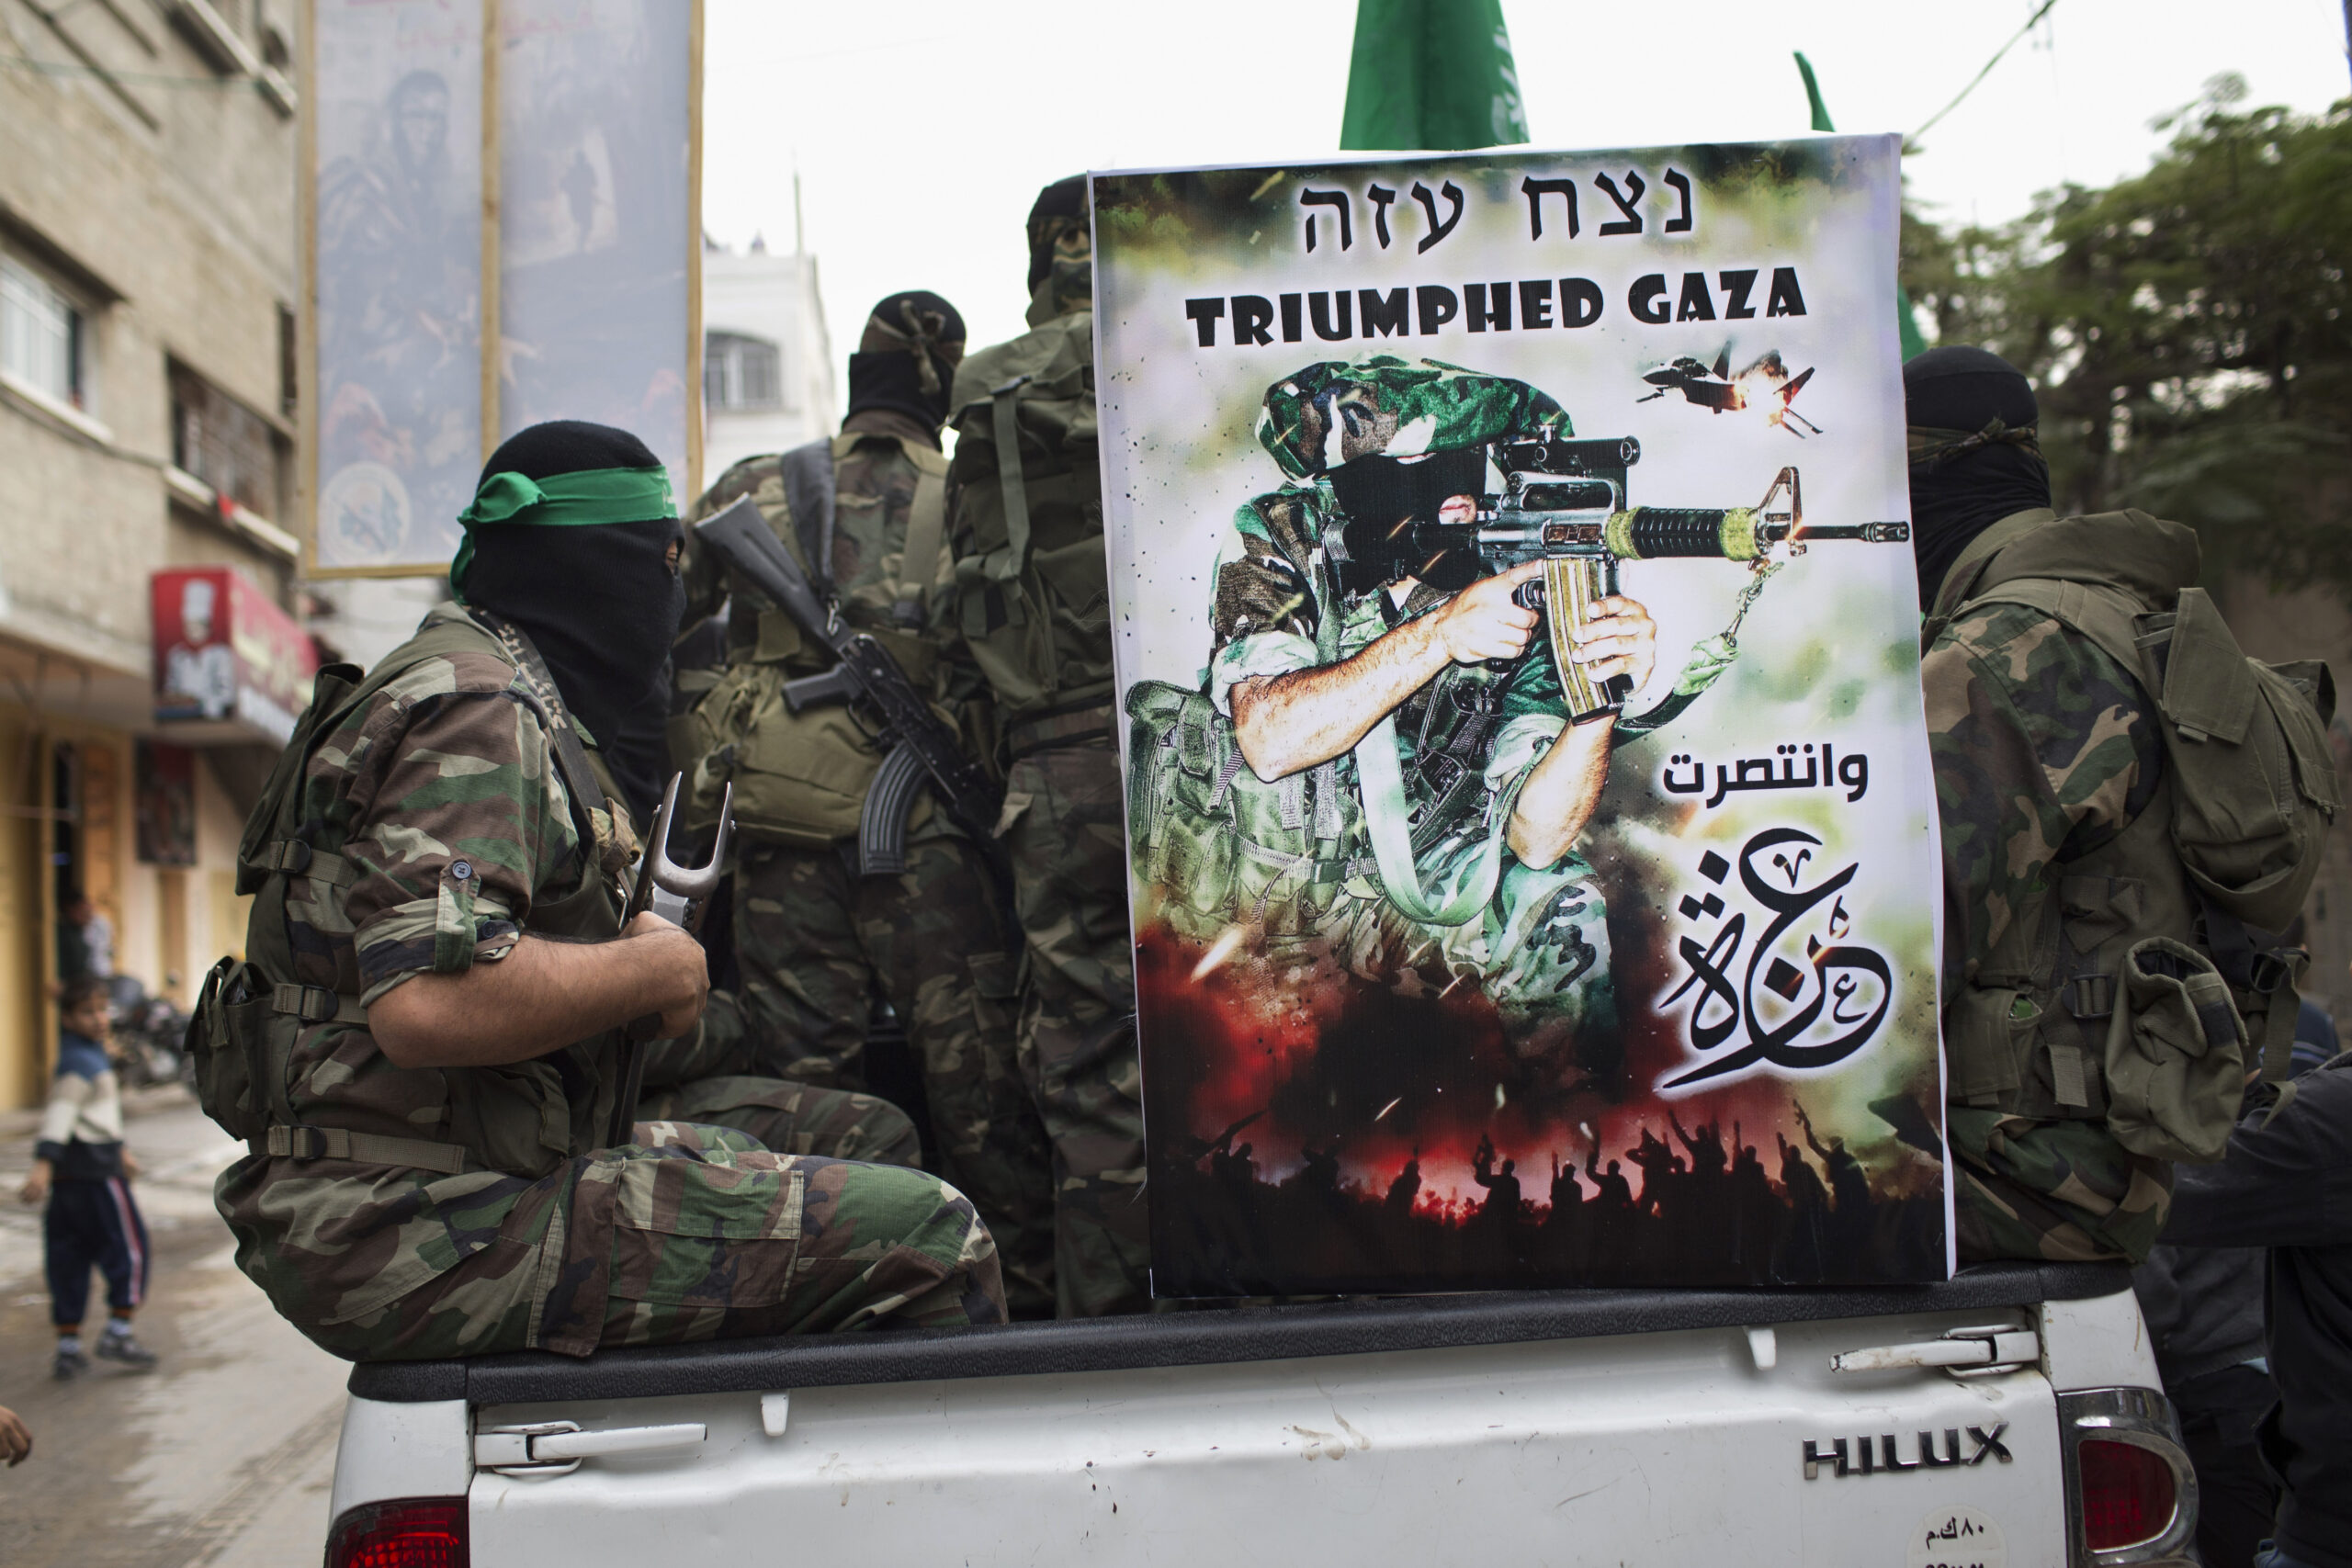 New Poll Finds U.S. Support for a Ceasefire In Gaza Swings Wildly Based On Whether or Not Hamas Stays in Power